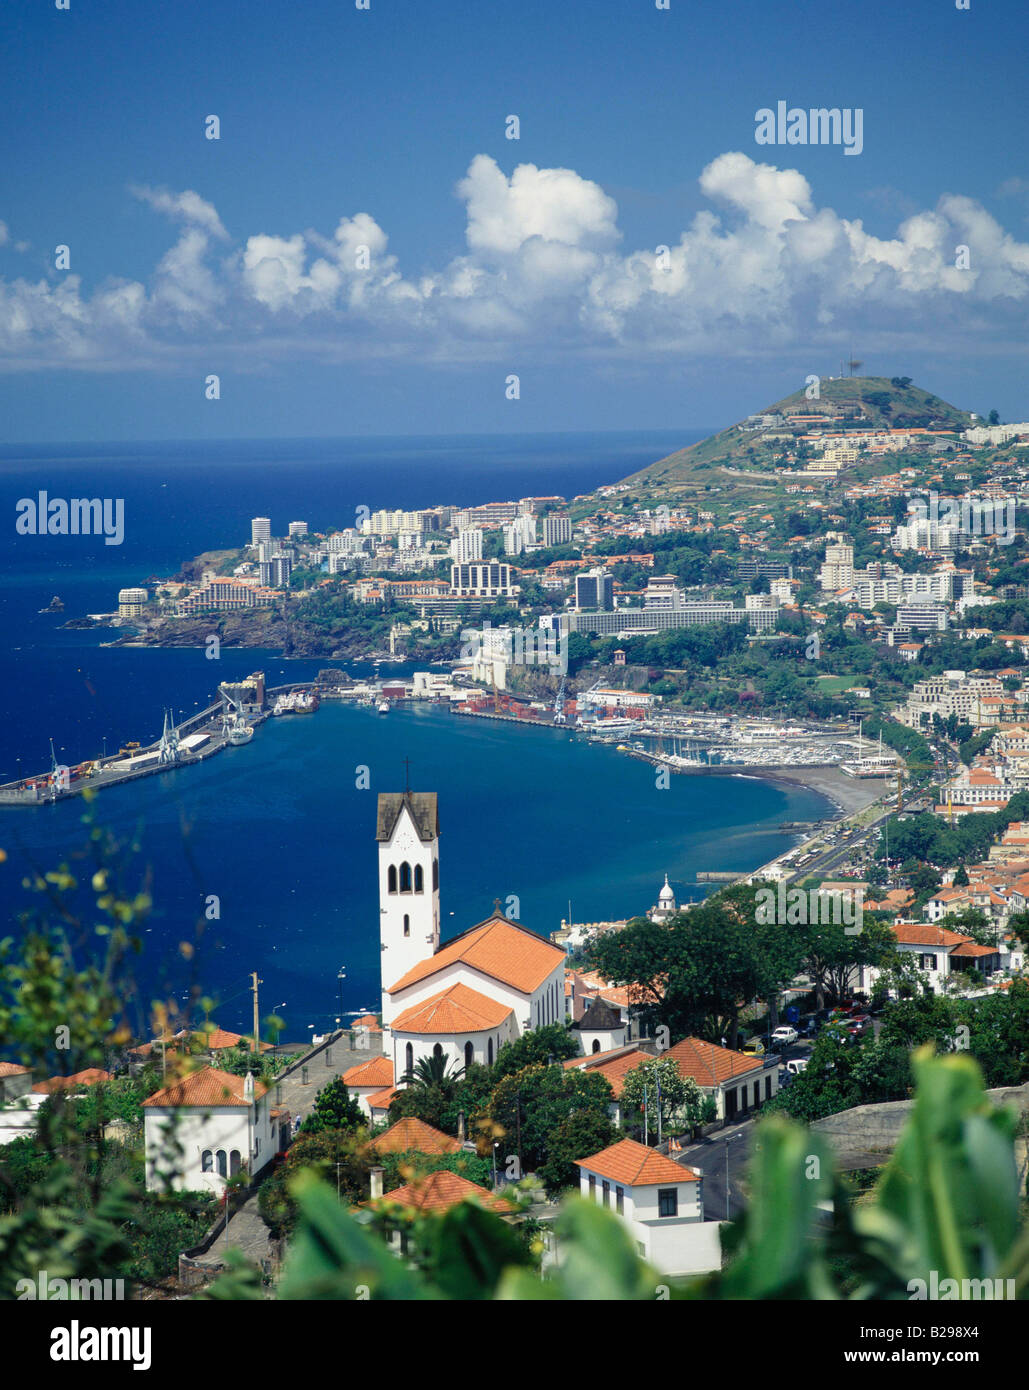 MADEIRA General view over Funchal Date 10 06 2008 Ref ZB548 114943 0002 COMPULSORY CREDIT World Pictures Photoshot Stock Photo